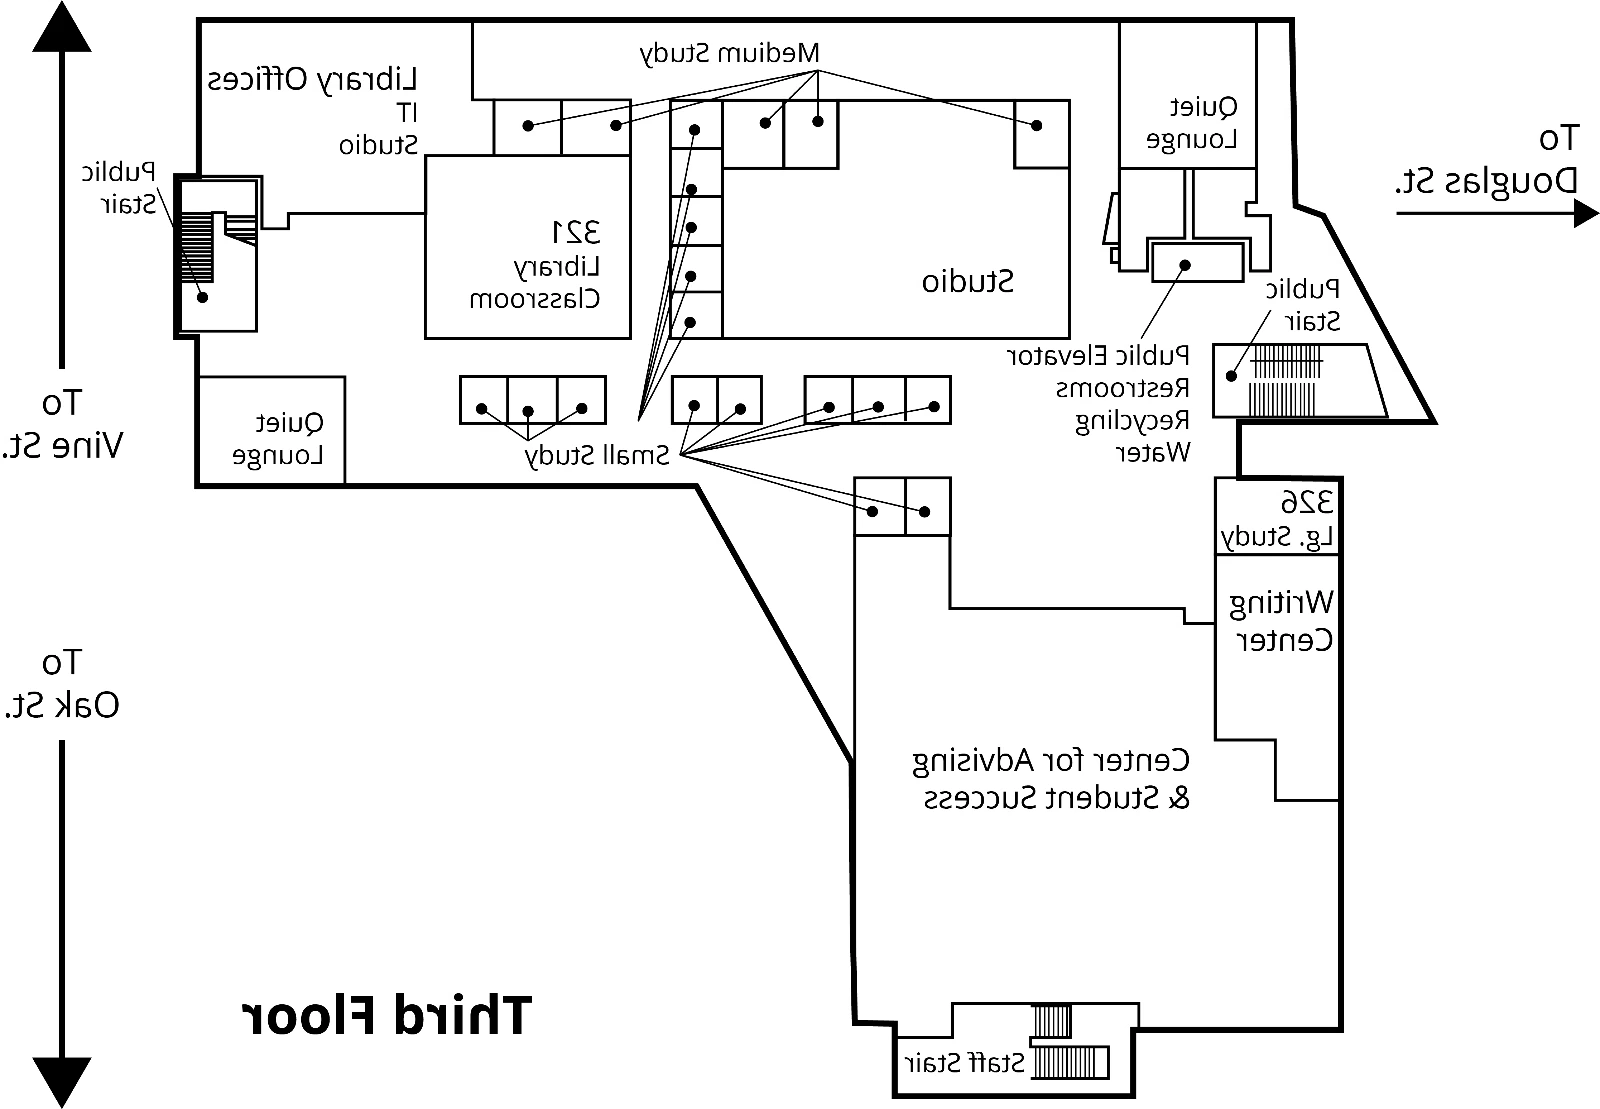 Map of library